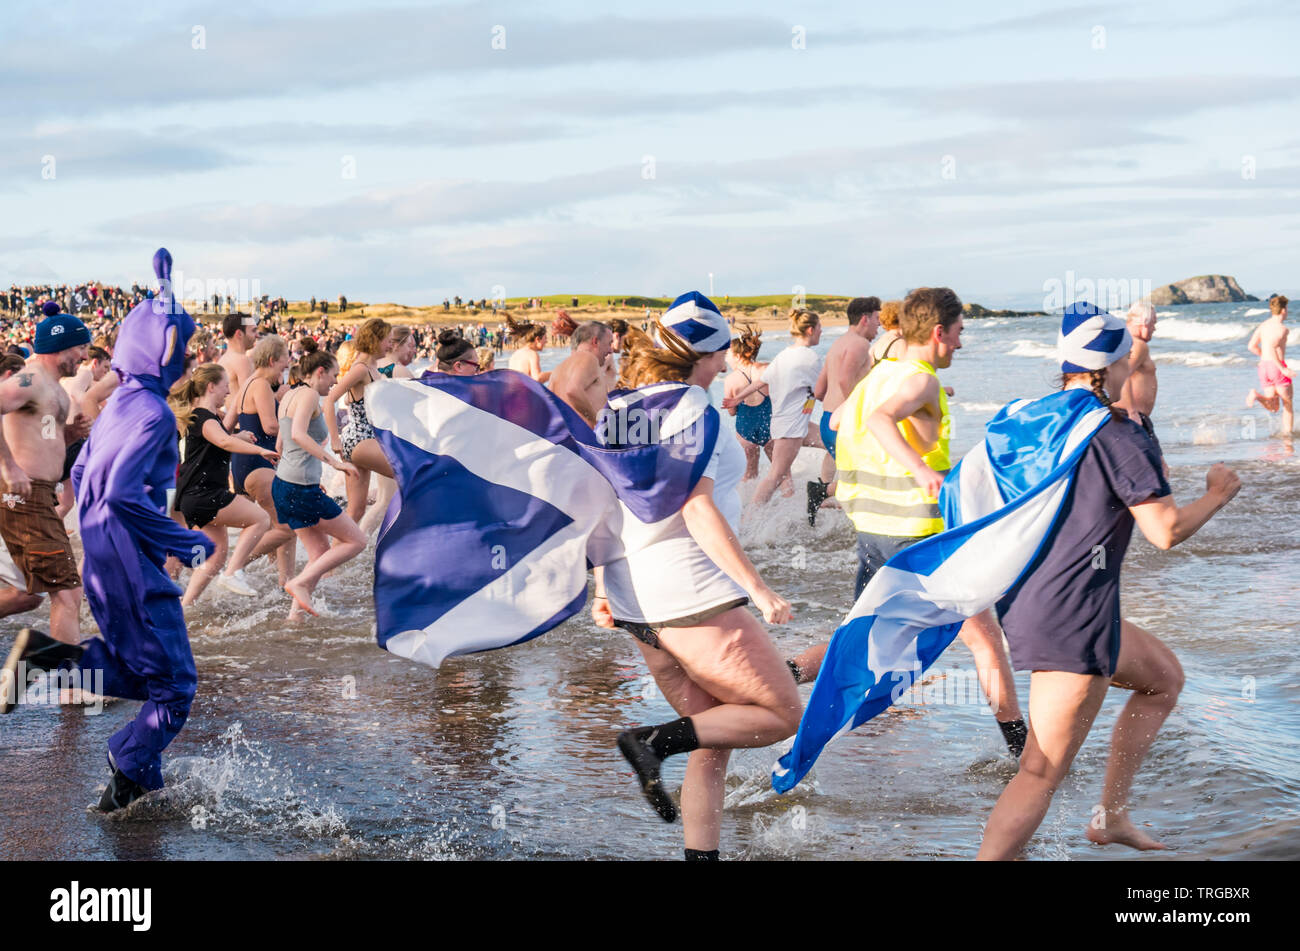 Loony Dook , New Year's Day: People brave the cold water, West Bay, Firth of Forth, North Berwick, East Lothian, Scotland, UK. People run into the sea Stock Photo